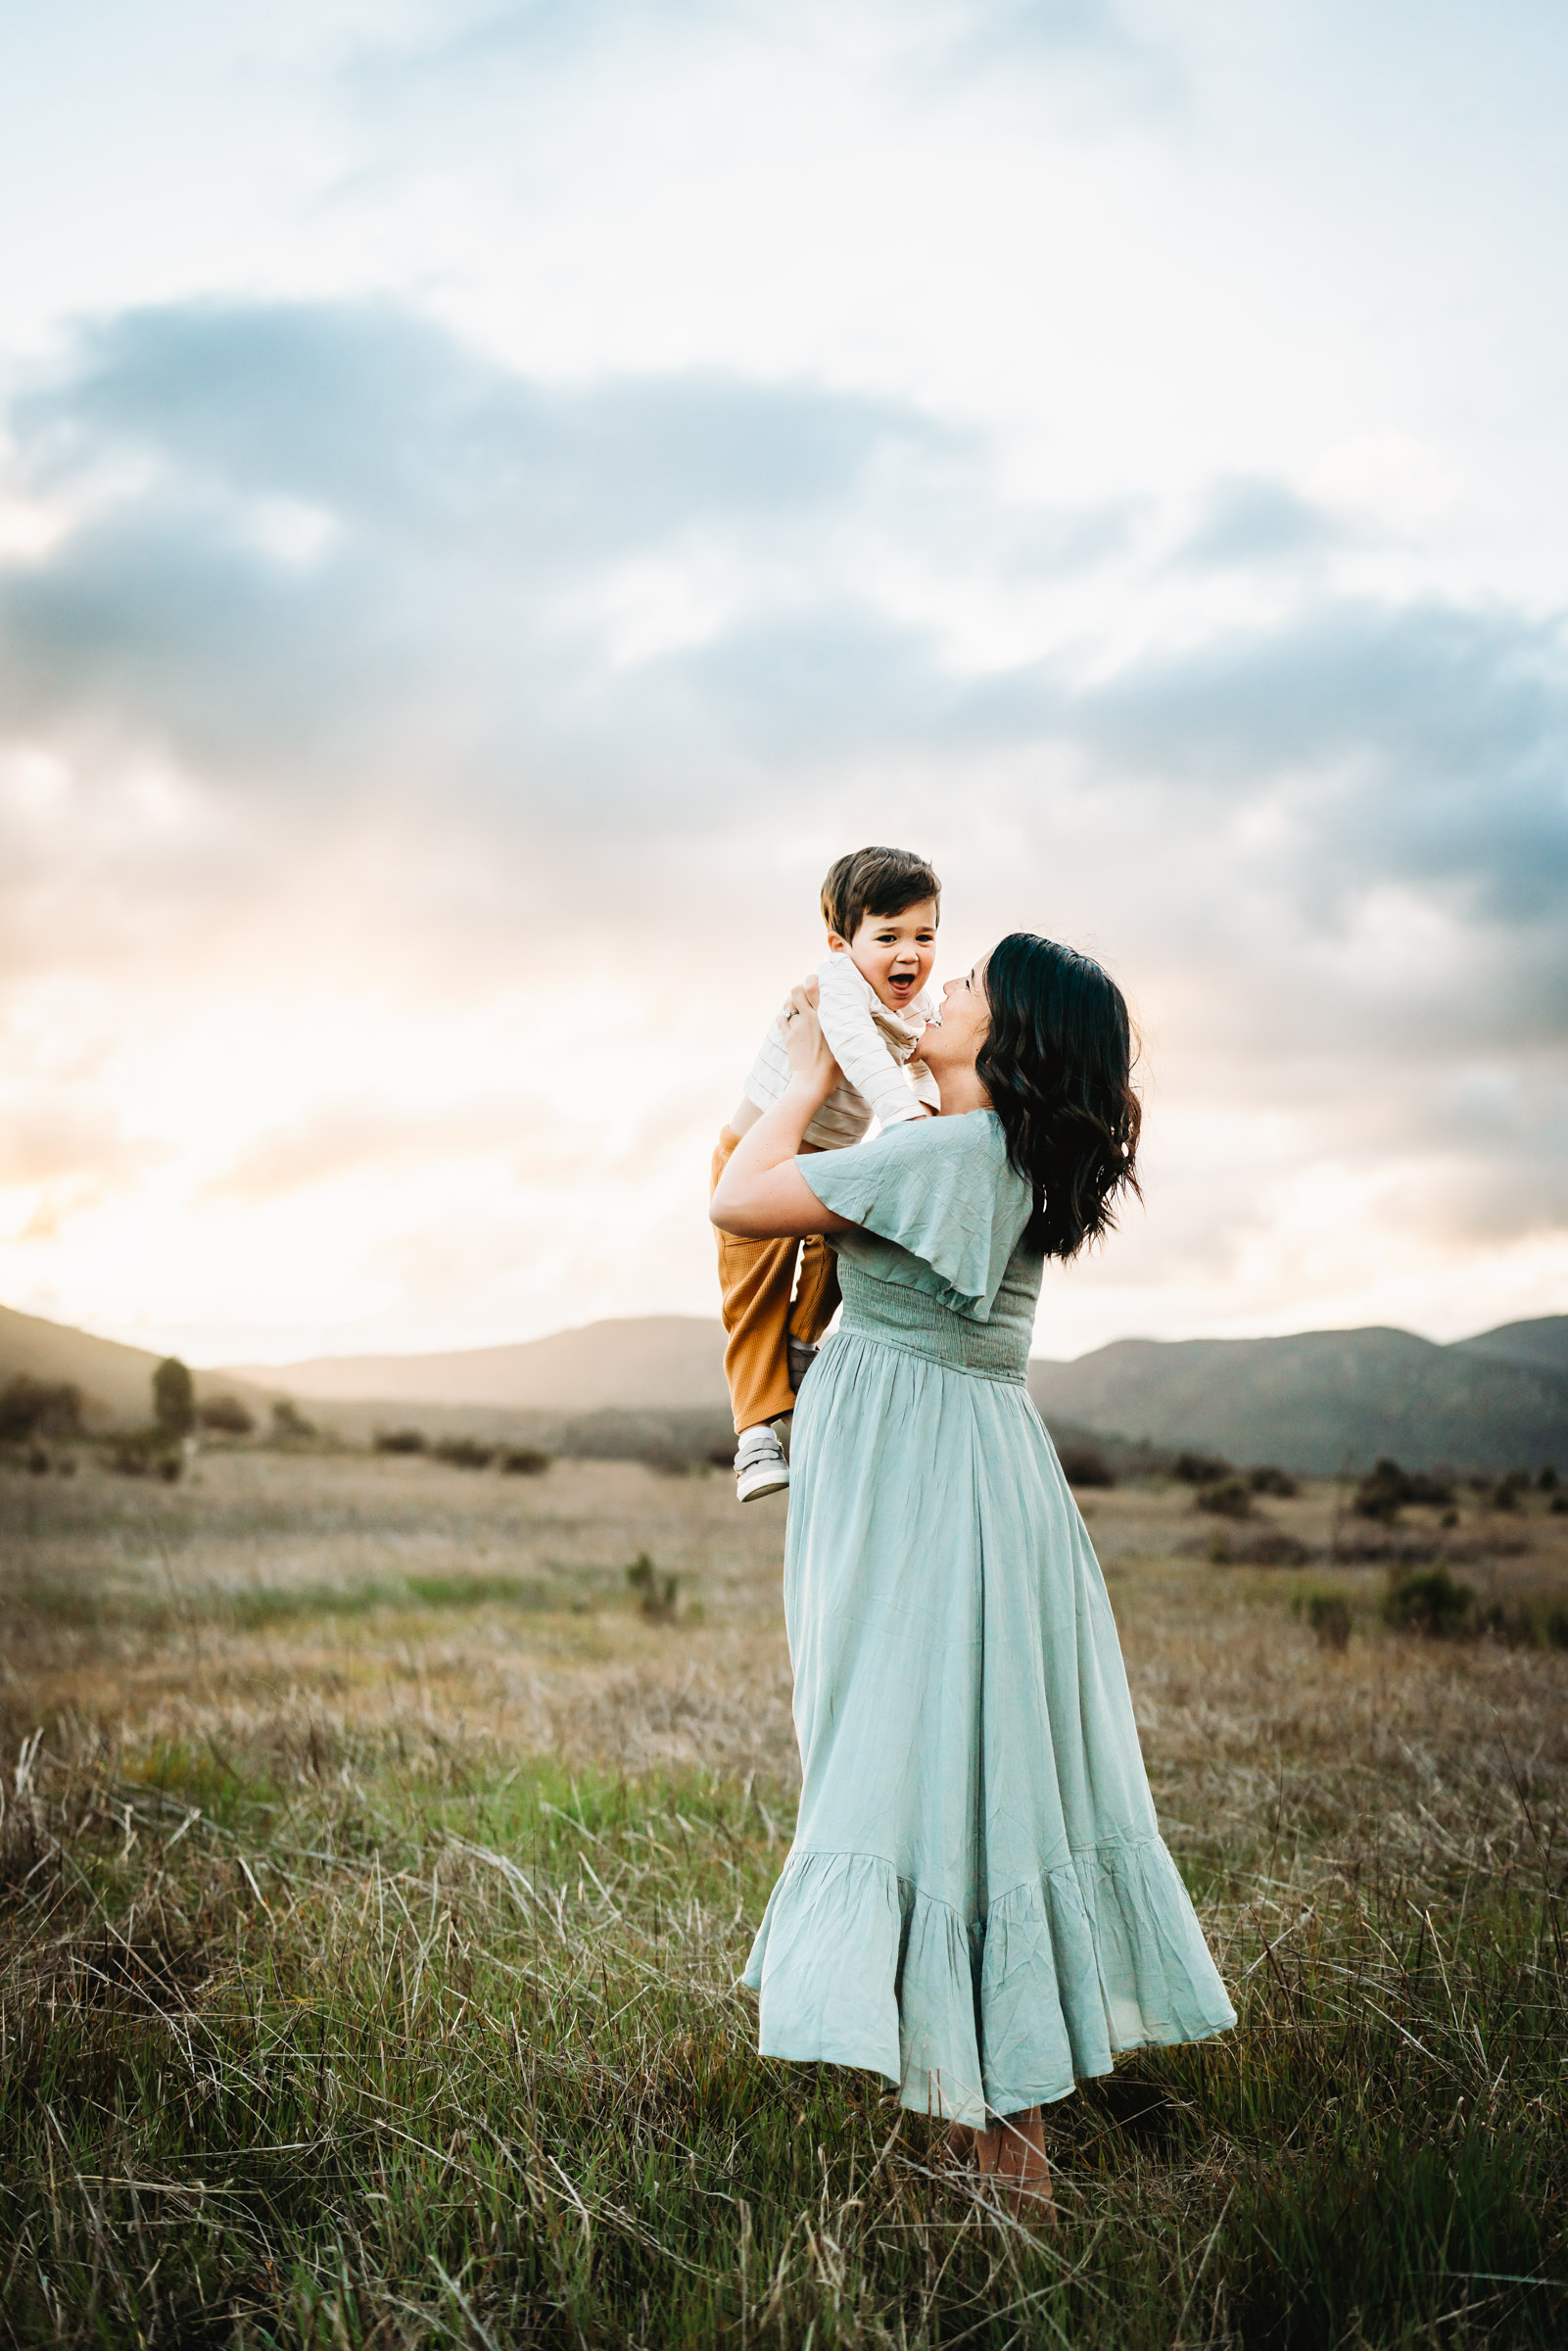 Pregnant woman holding her little boy on a field in Mission Trails Regional Park during a San Diego lifestyle maternity photo session.